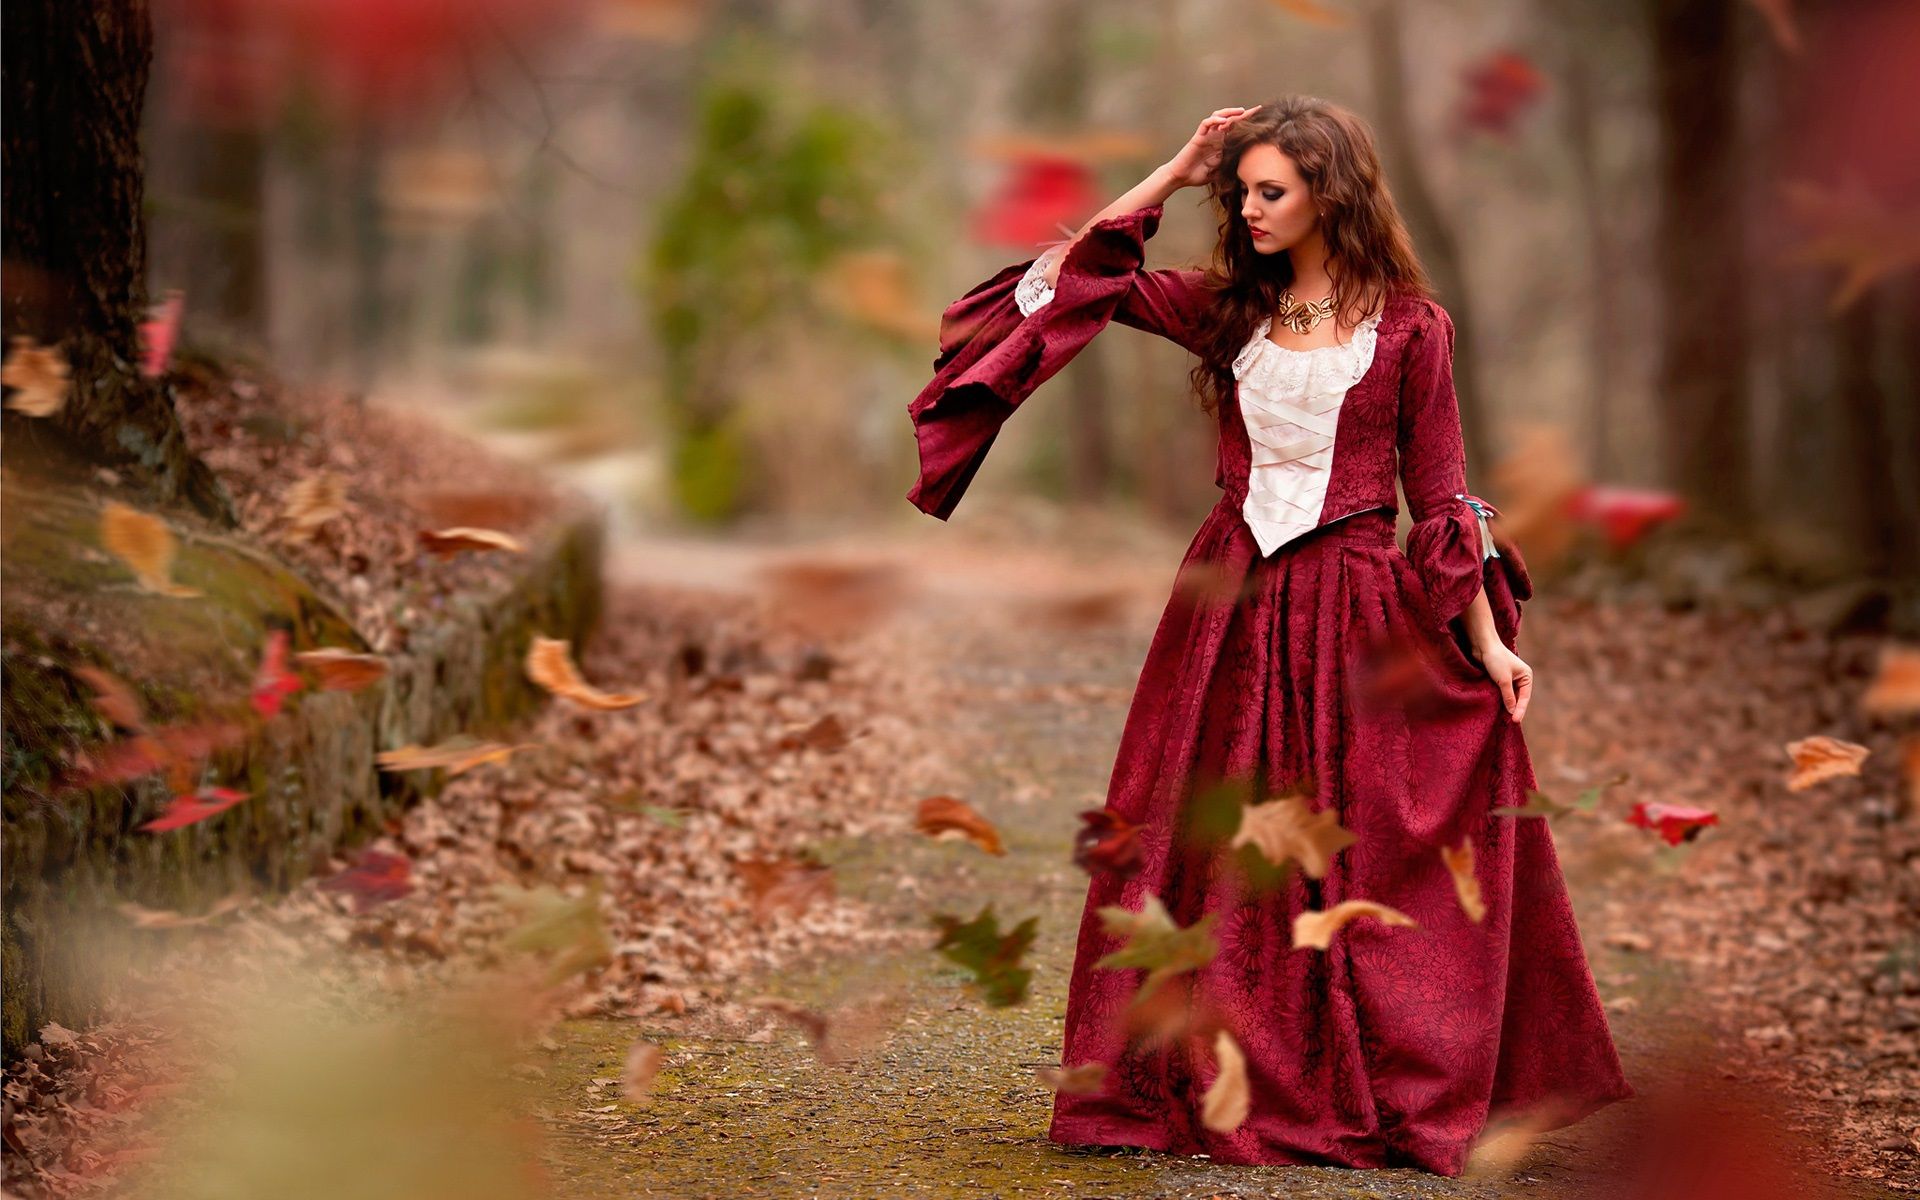 Wallpaper Autumn, leaves, red dress girl, wind 1920x1200 HD Picture, Image